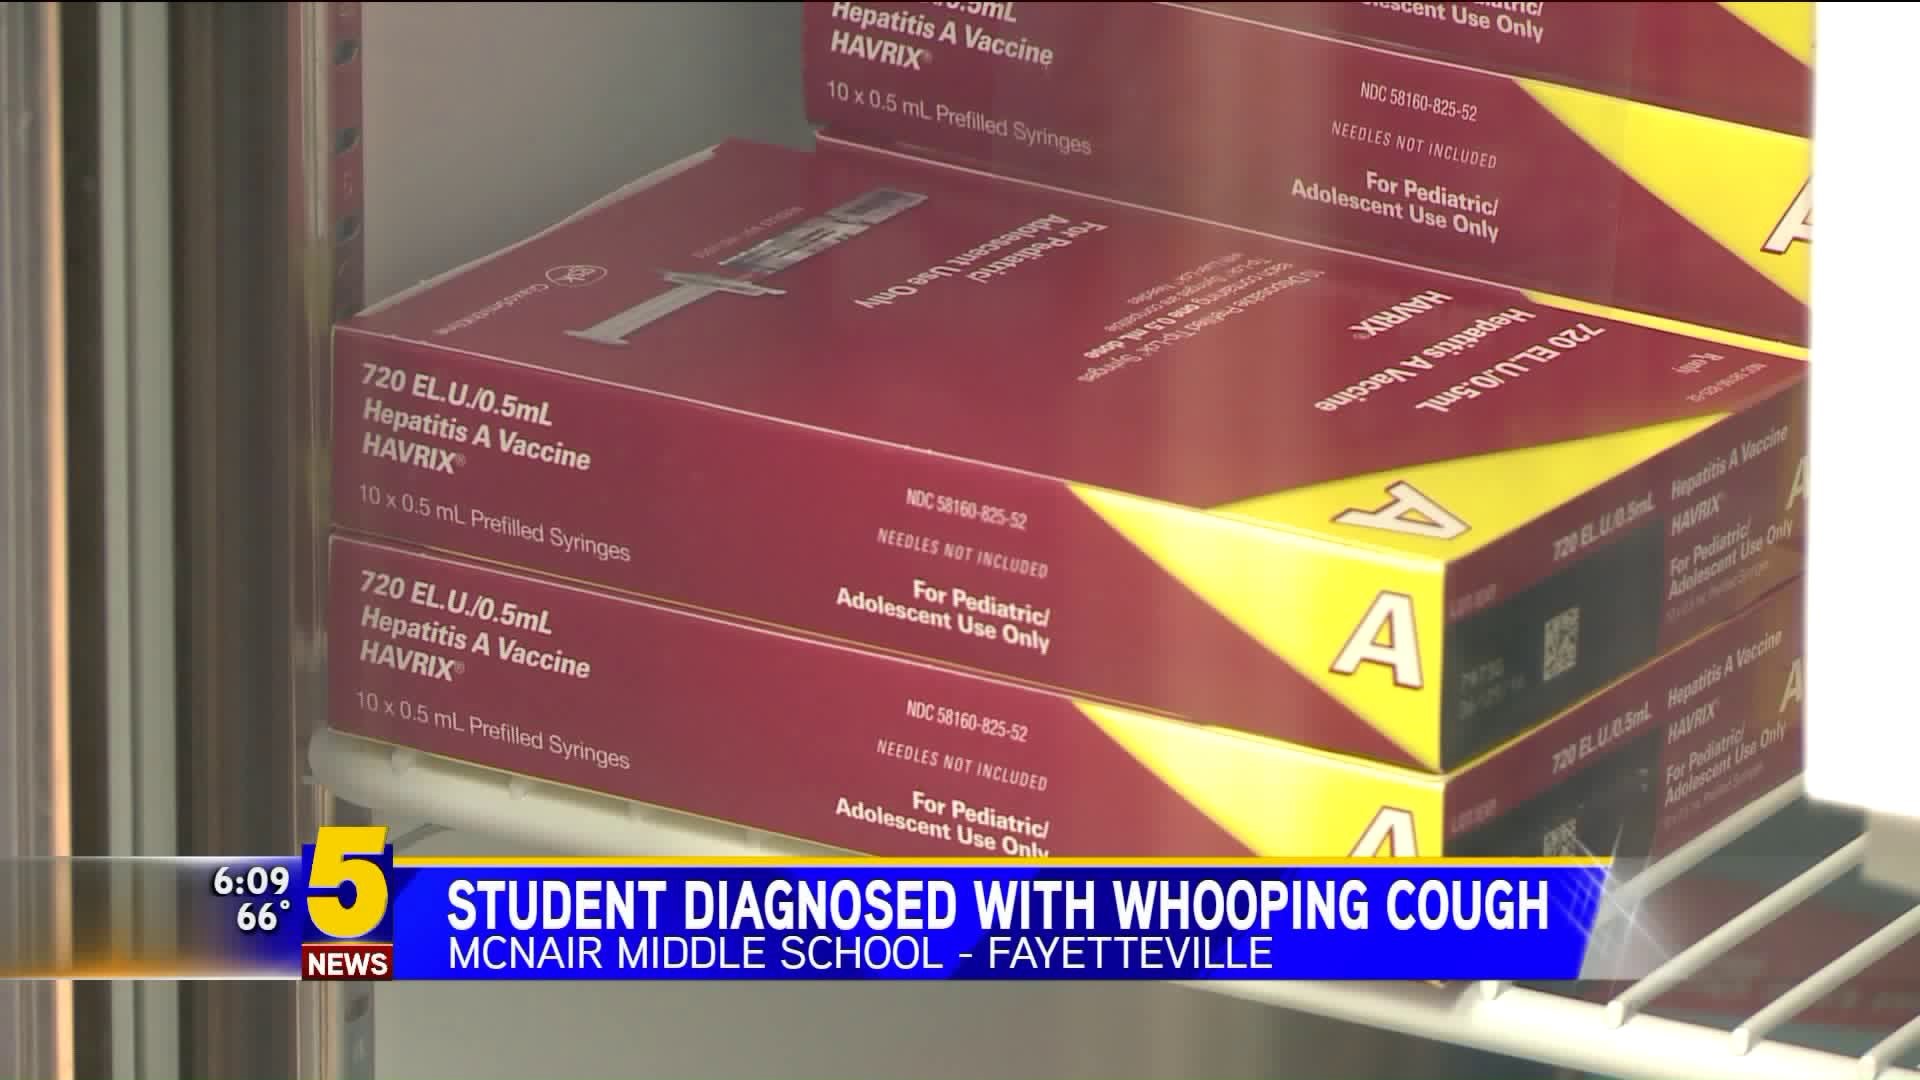 Fayetteville Student Diagnosed With Whooping Cough